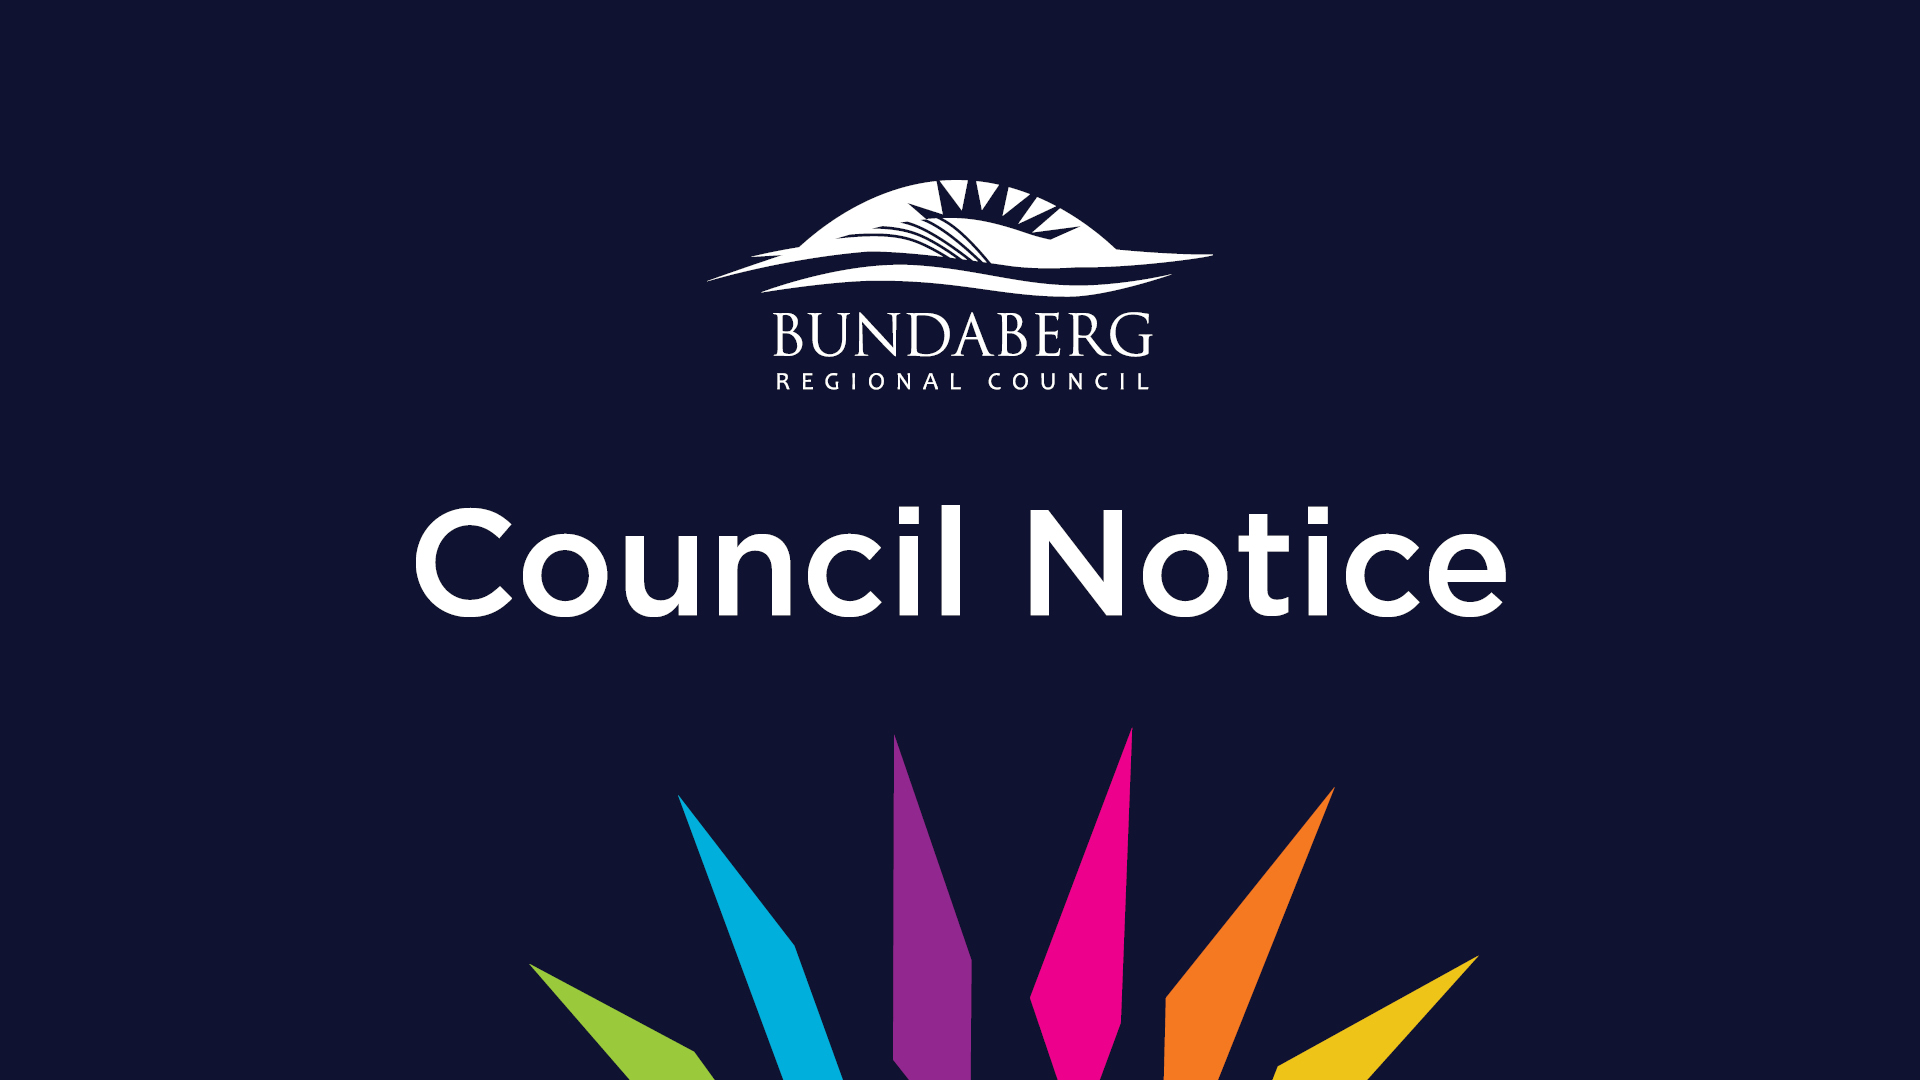 BN-Council-Notice-feature-1.jpg